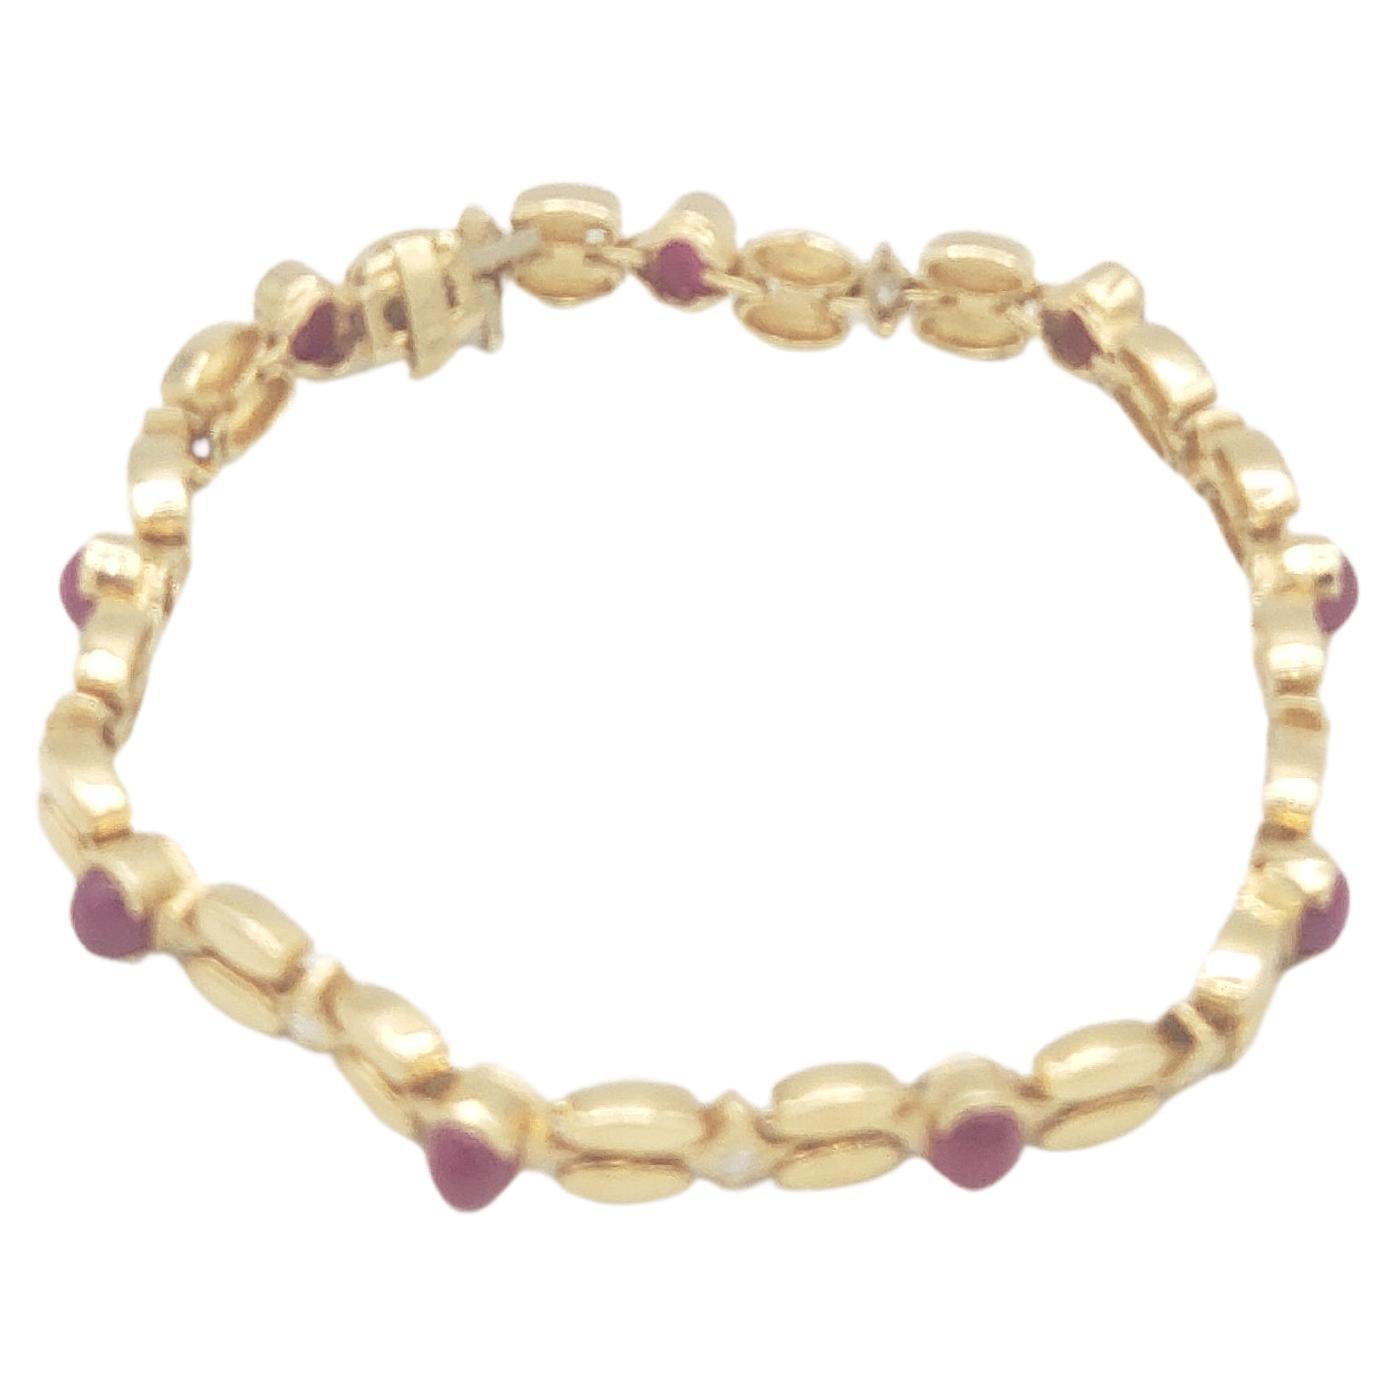 Add a touch of elegance to your jewelry collection with this 14k solid yellow gold bracelet from LaFrancee. The oval-shaped natural precious ruby stones and sparkling diamonds are carefully crafted to create a stunning tennis-style bracelet that is